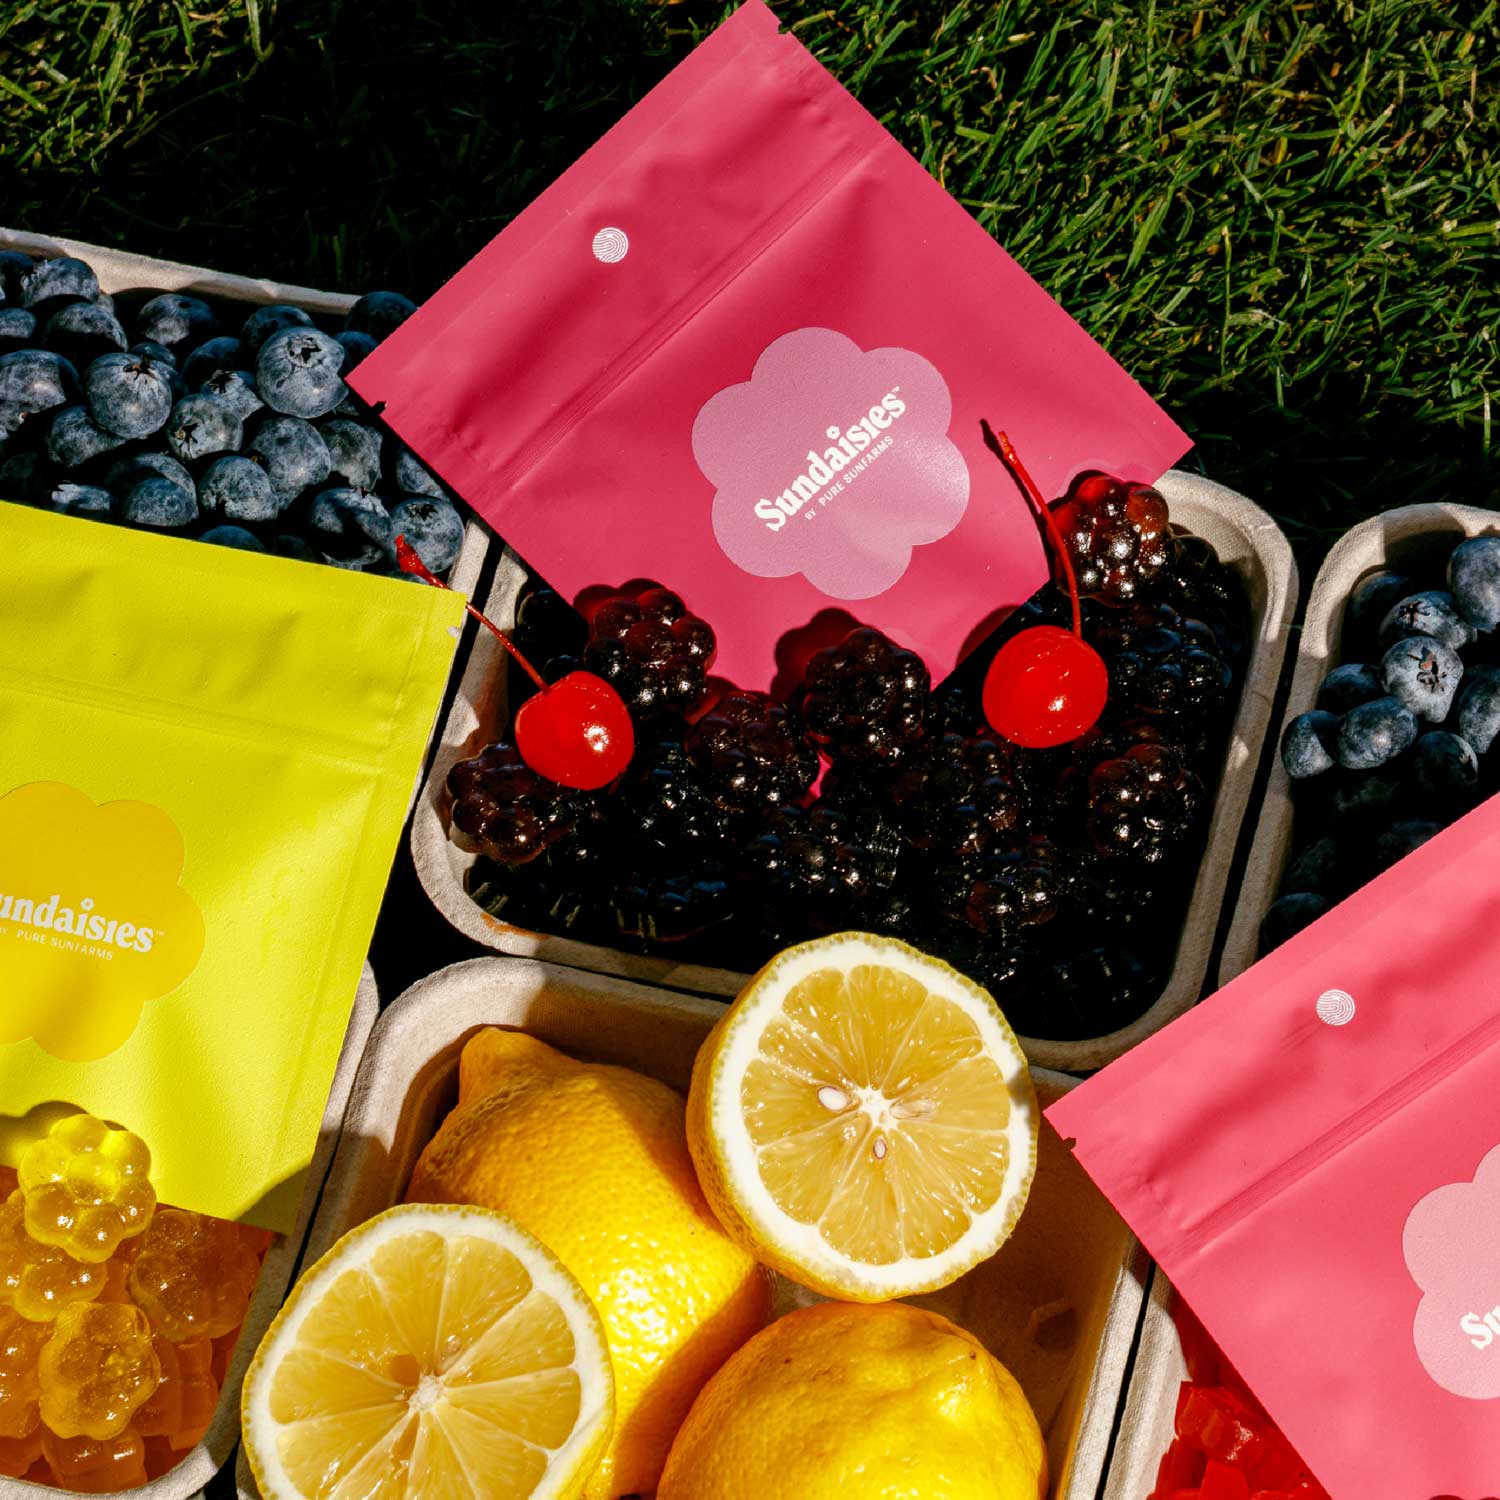 Concept packaging within fruit trays.